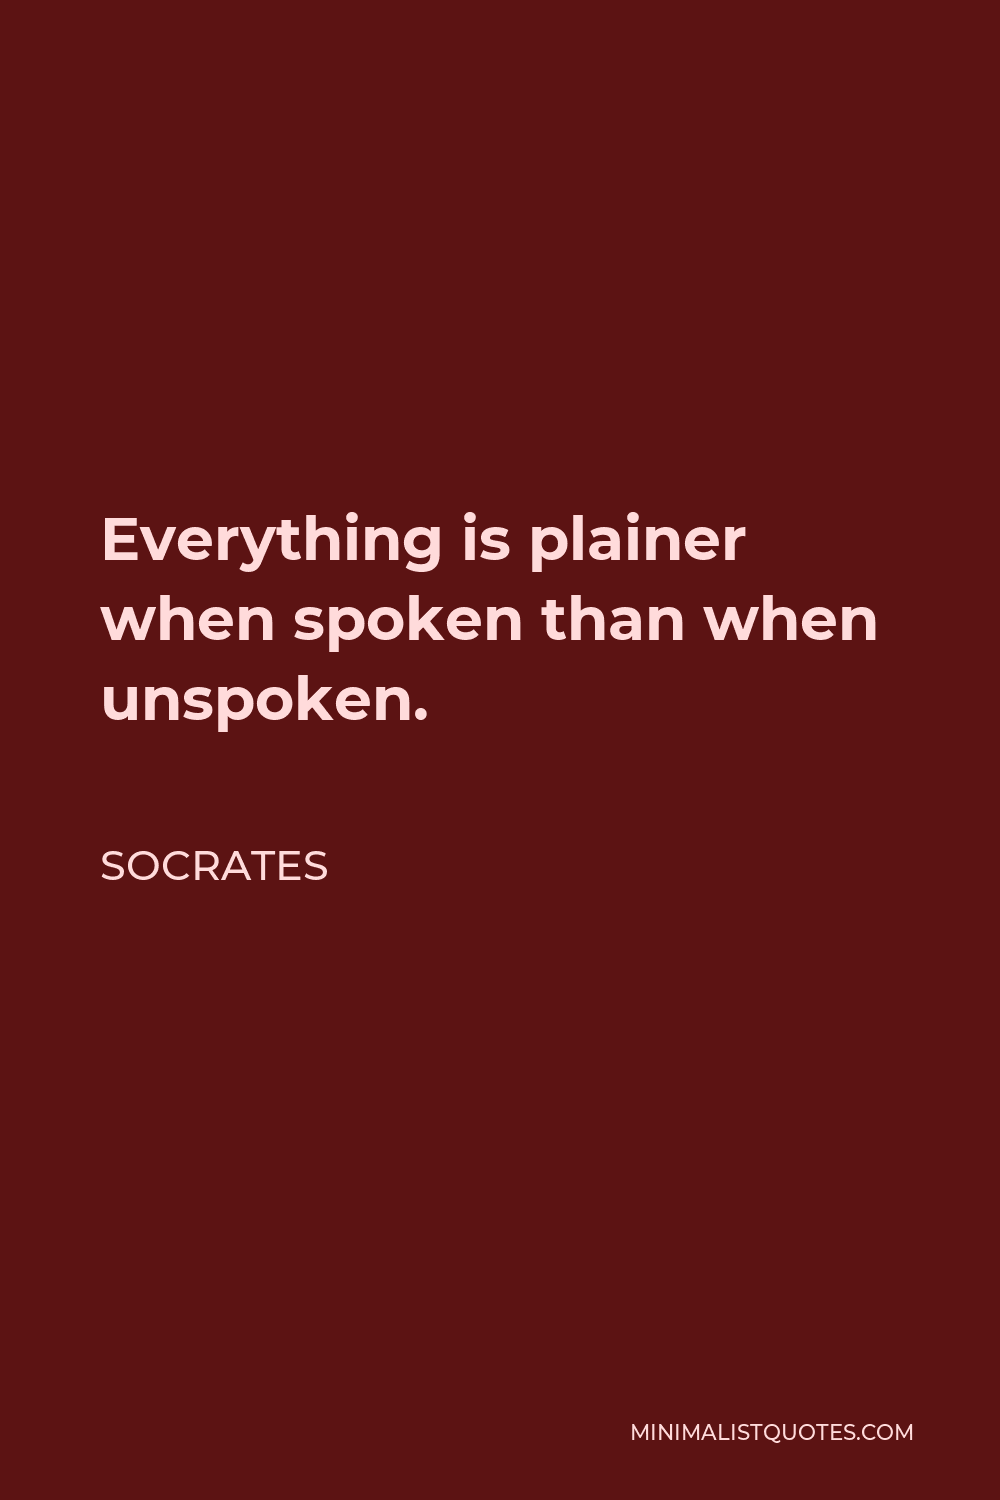 Socrates Quote - Everything is plainer when spoken than when unspoken.